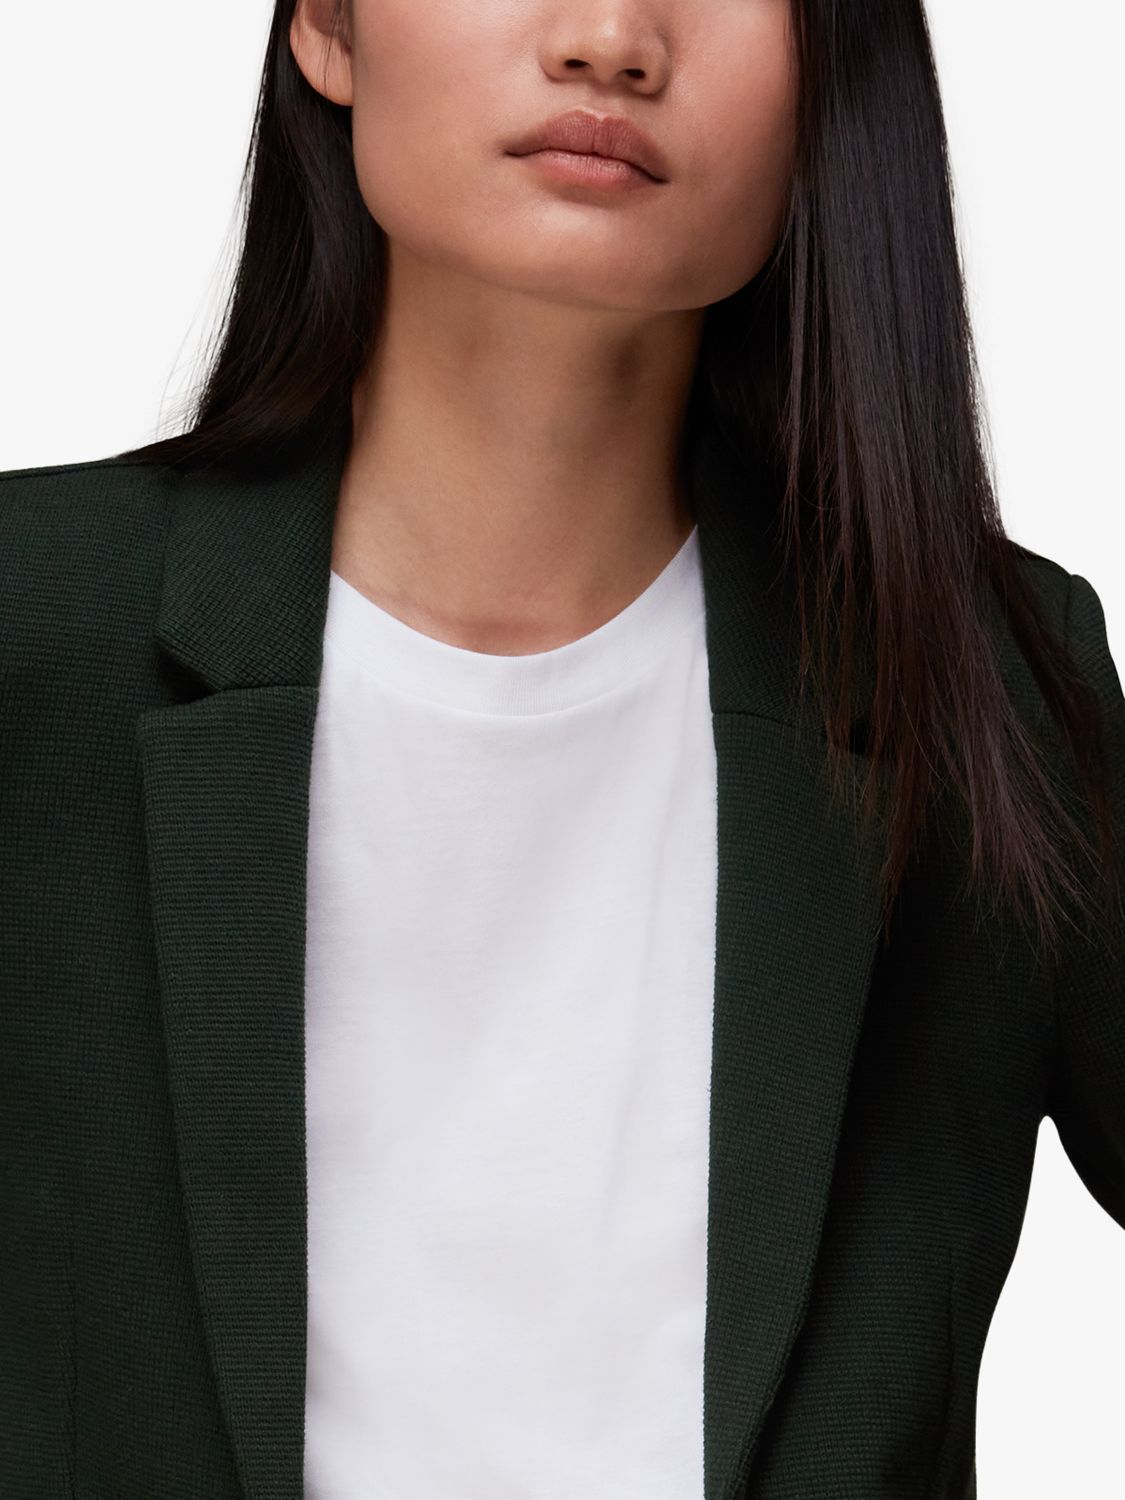 Whistles Slim Jersey Jacket, Forest Green, 6